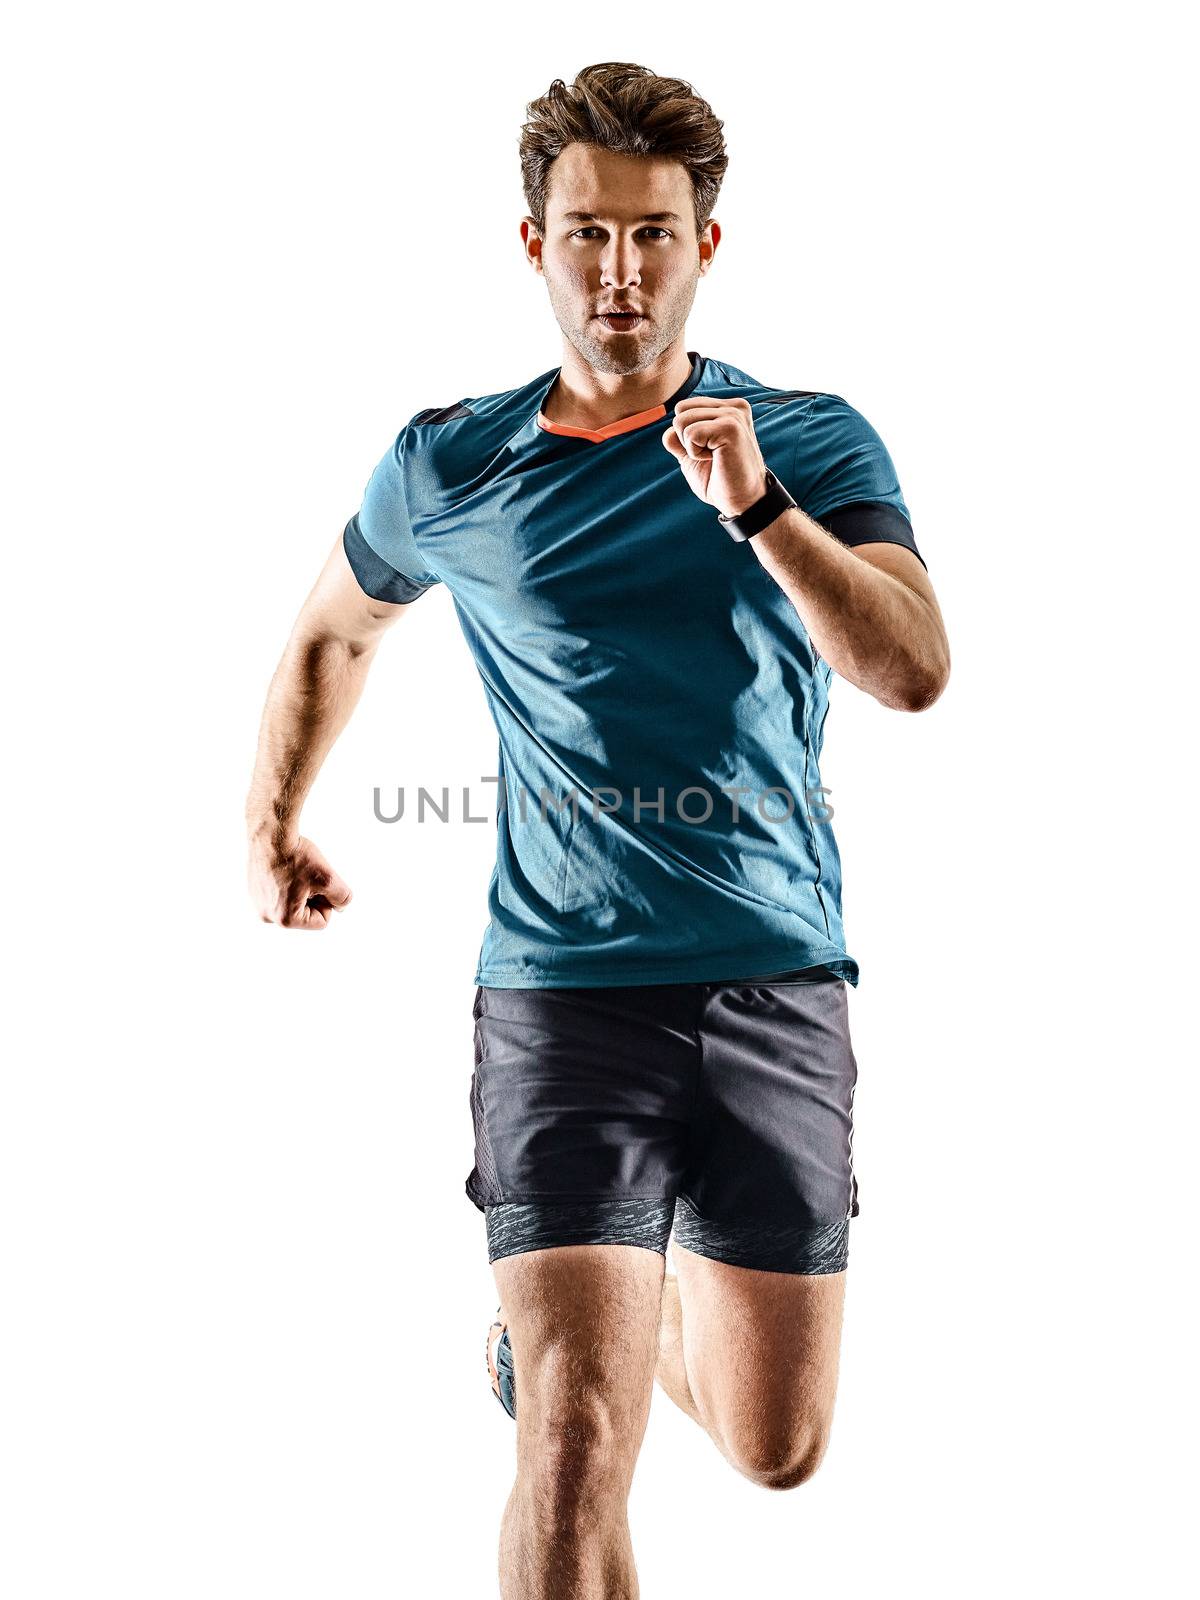 one caucasian runner running jogger jogger young man in studio isolated on white background